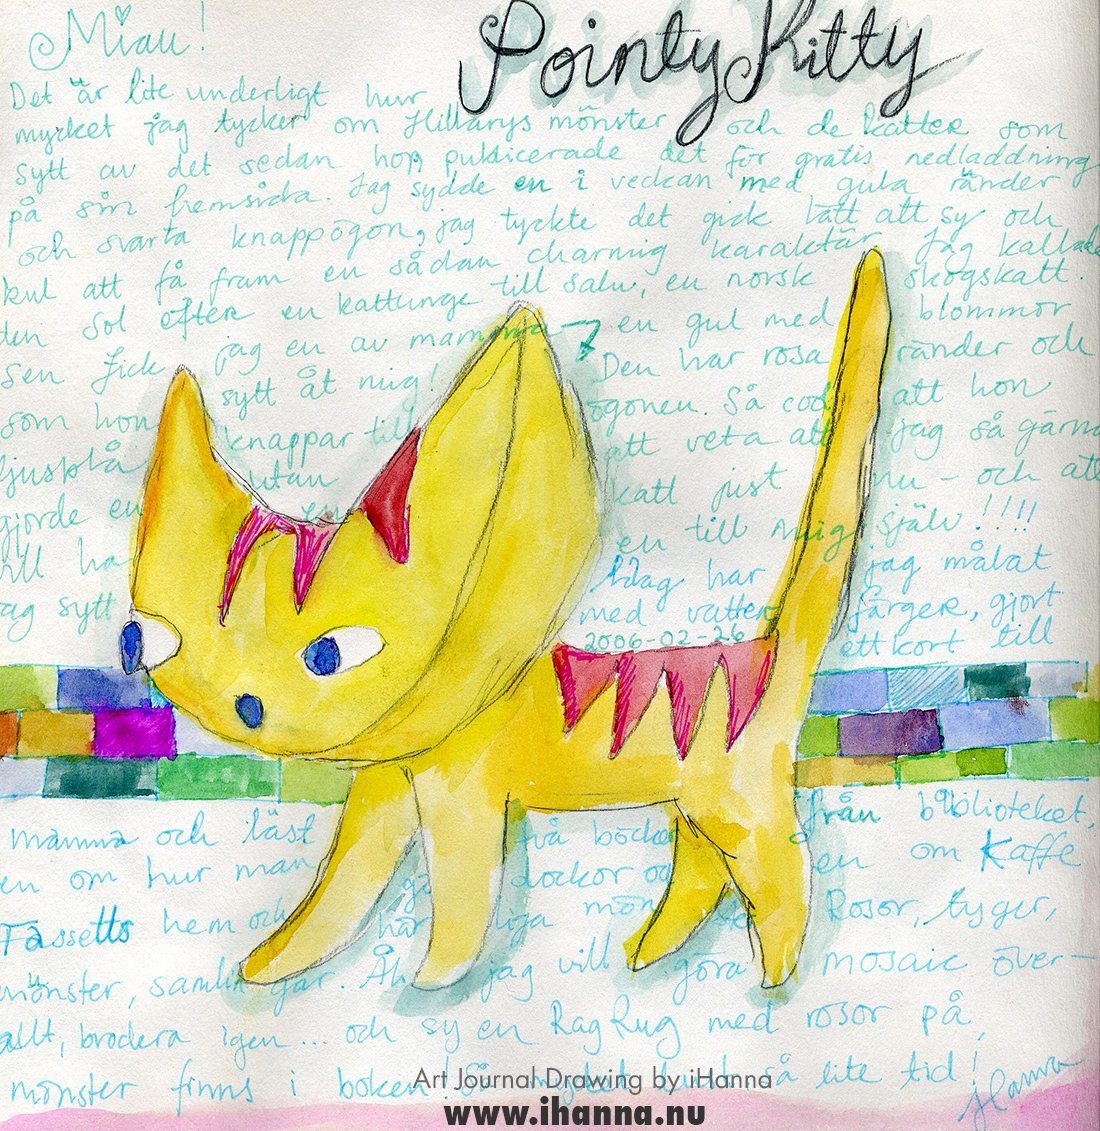 iHanna's drawing of a Pointy Kitty #artjournaling